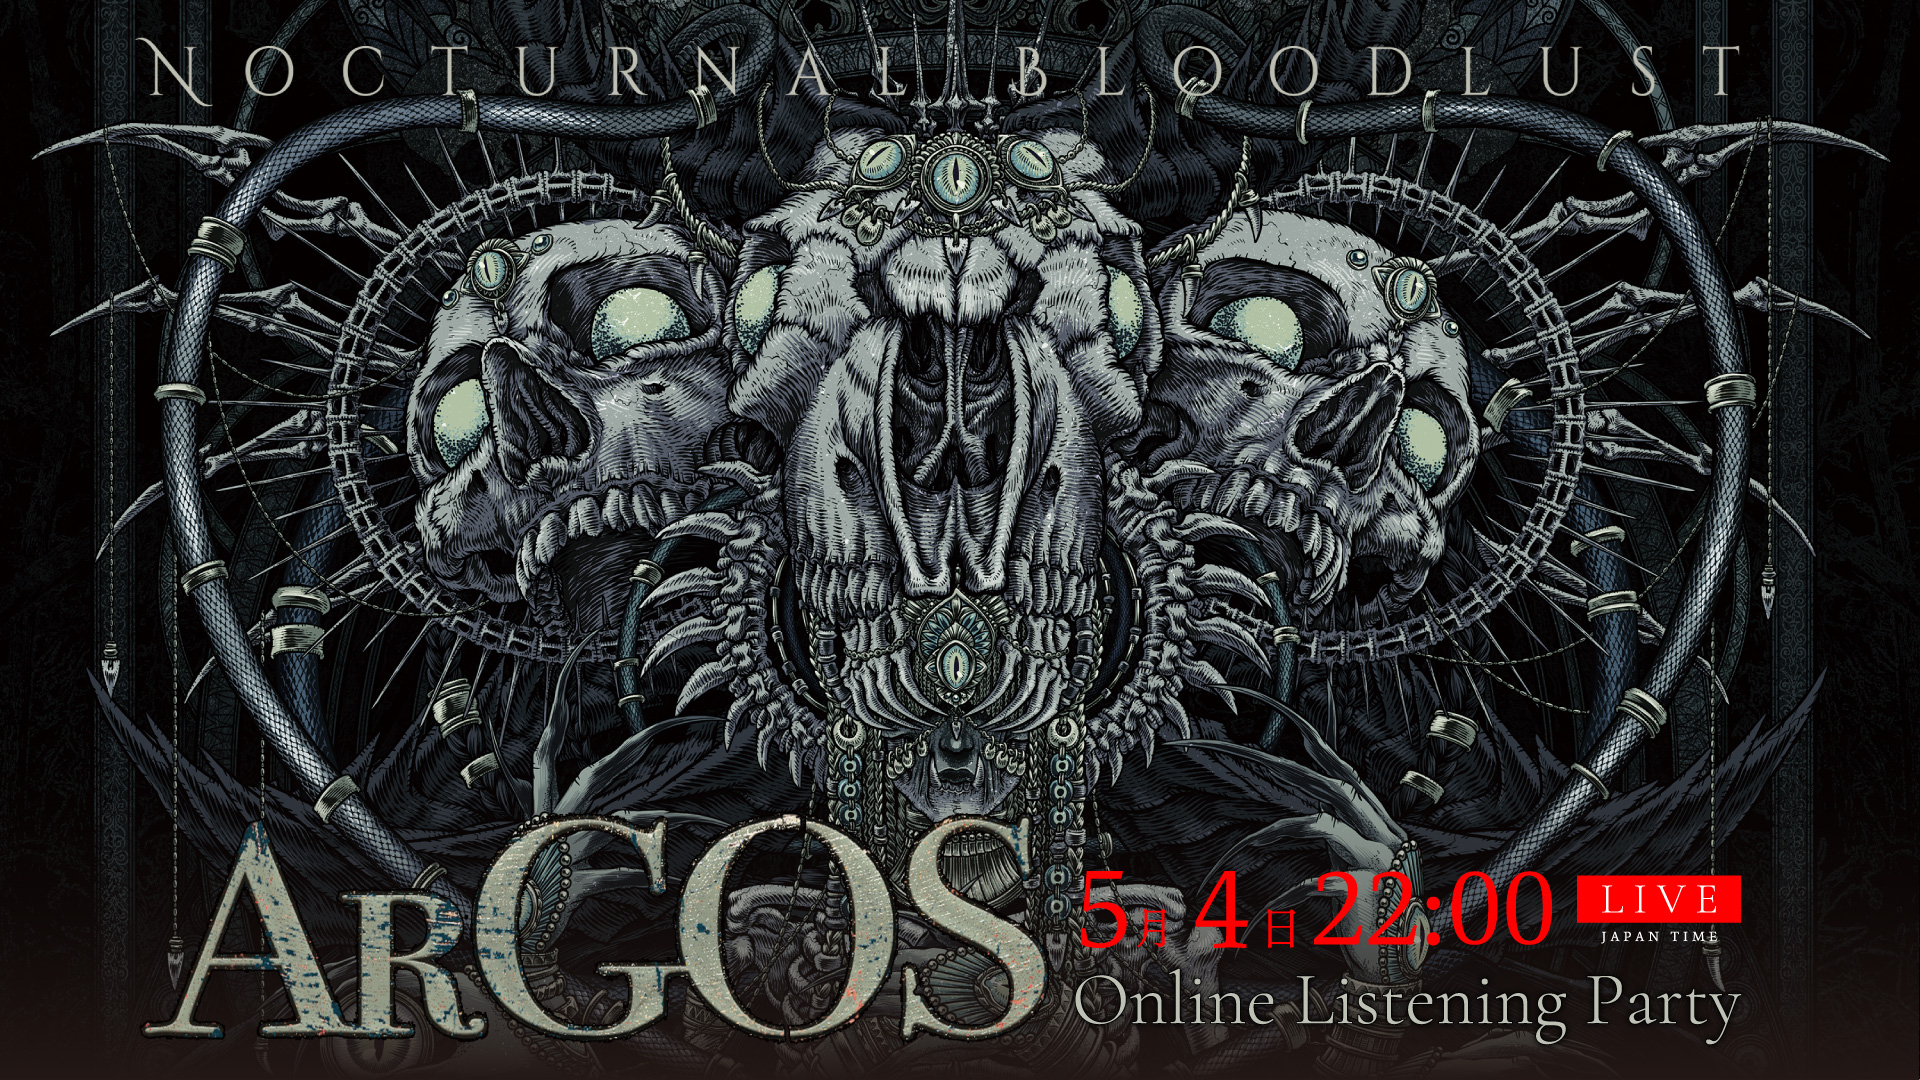 “AGROS” Online Listening Party Confirmed!